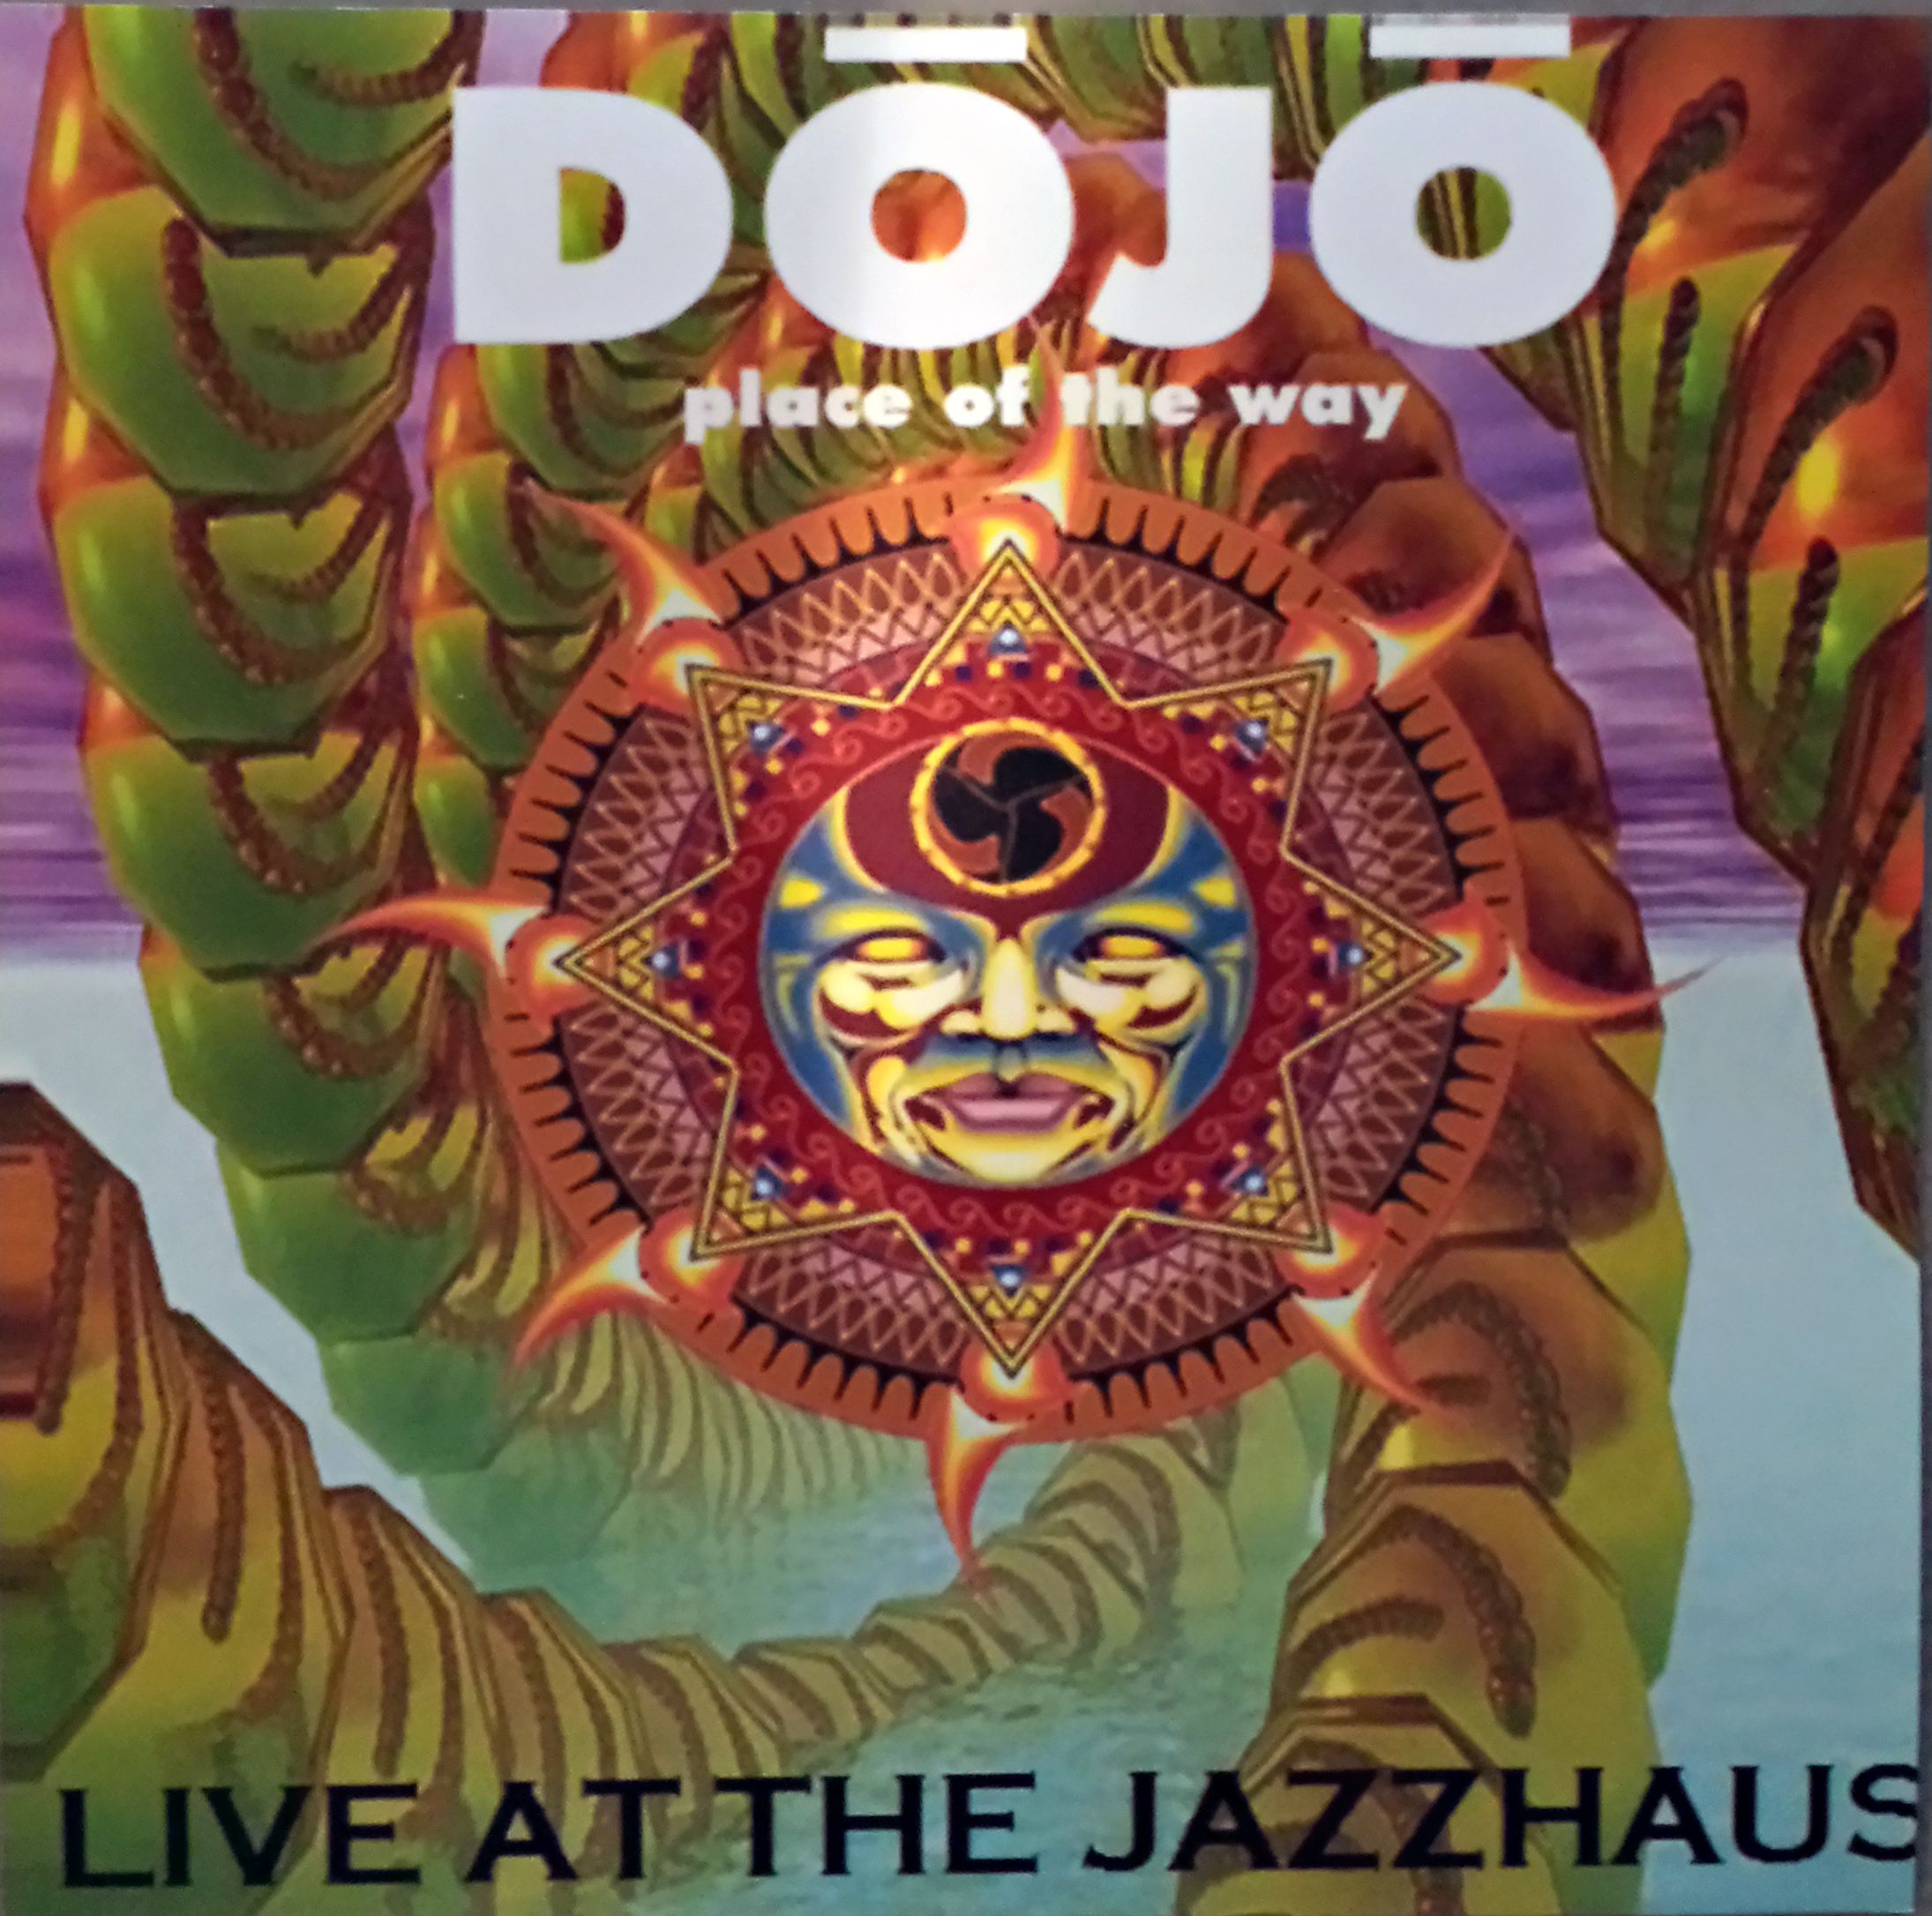 DŌJŌ - Place of the Way Live at the Jazzhaus